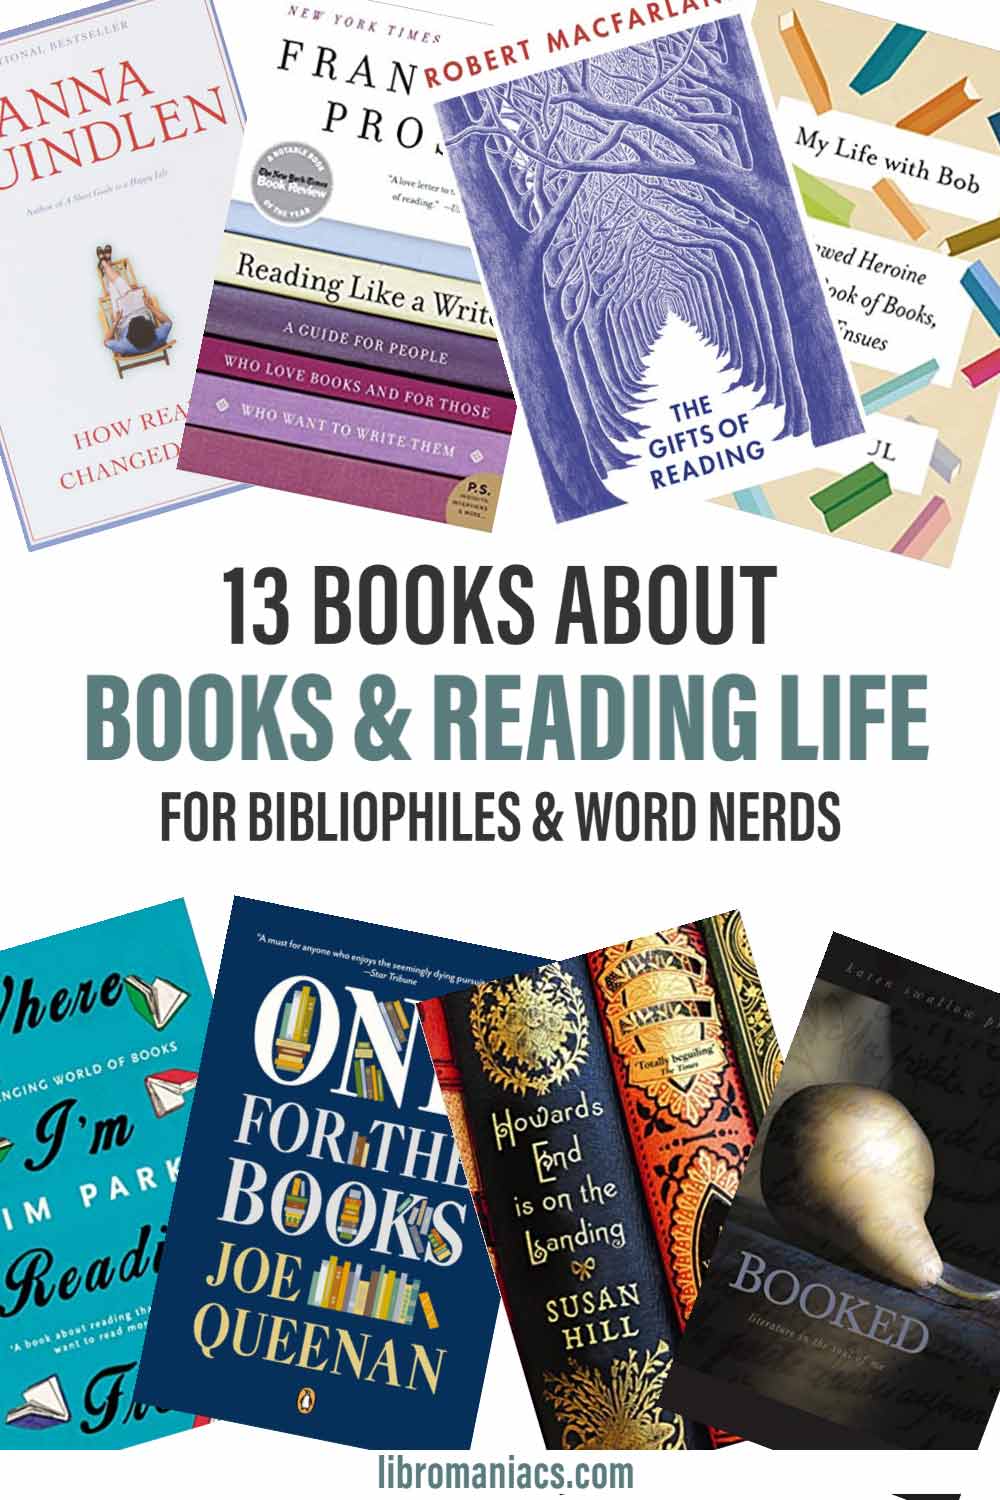 books about books and reading life, for bibliophiles and word nerds.